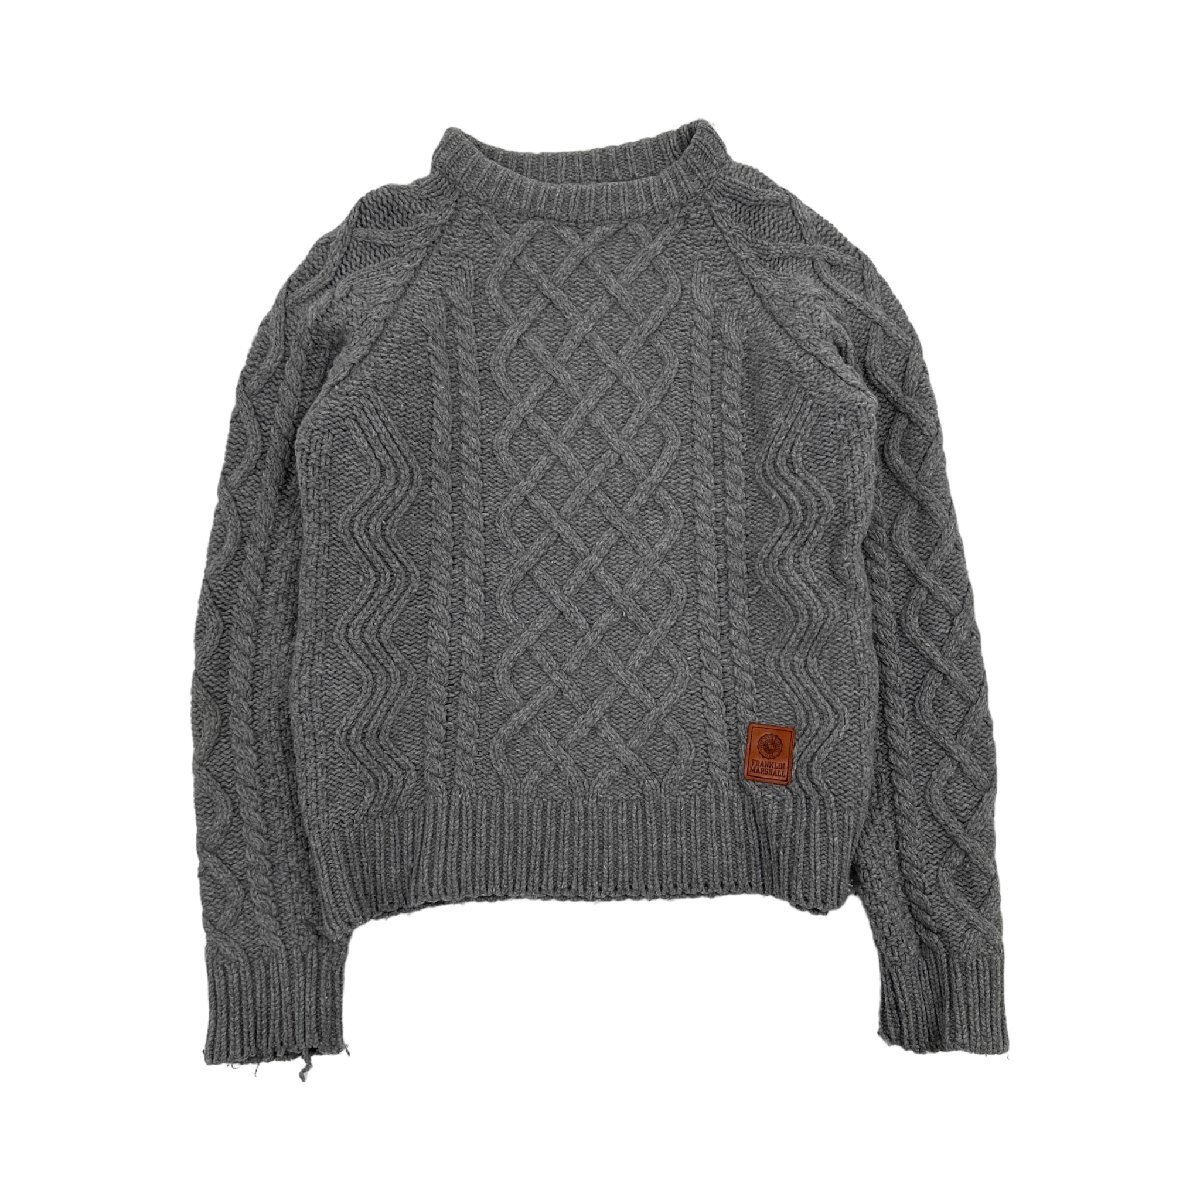  Italy made *FRANKLIN&MARSHALL Frank Lynn & Marshall wool knitted Fisherman sweater XS size / gray / man woman also 